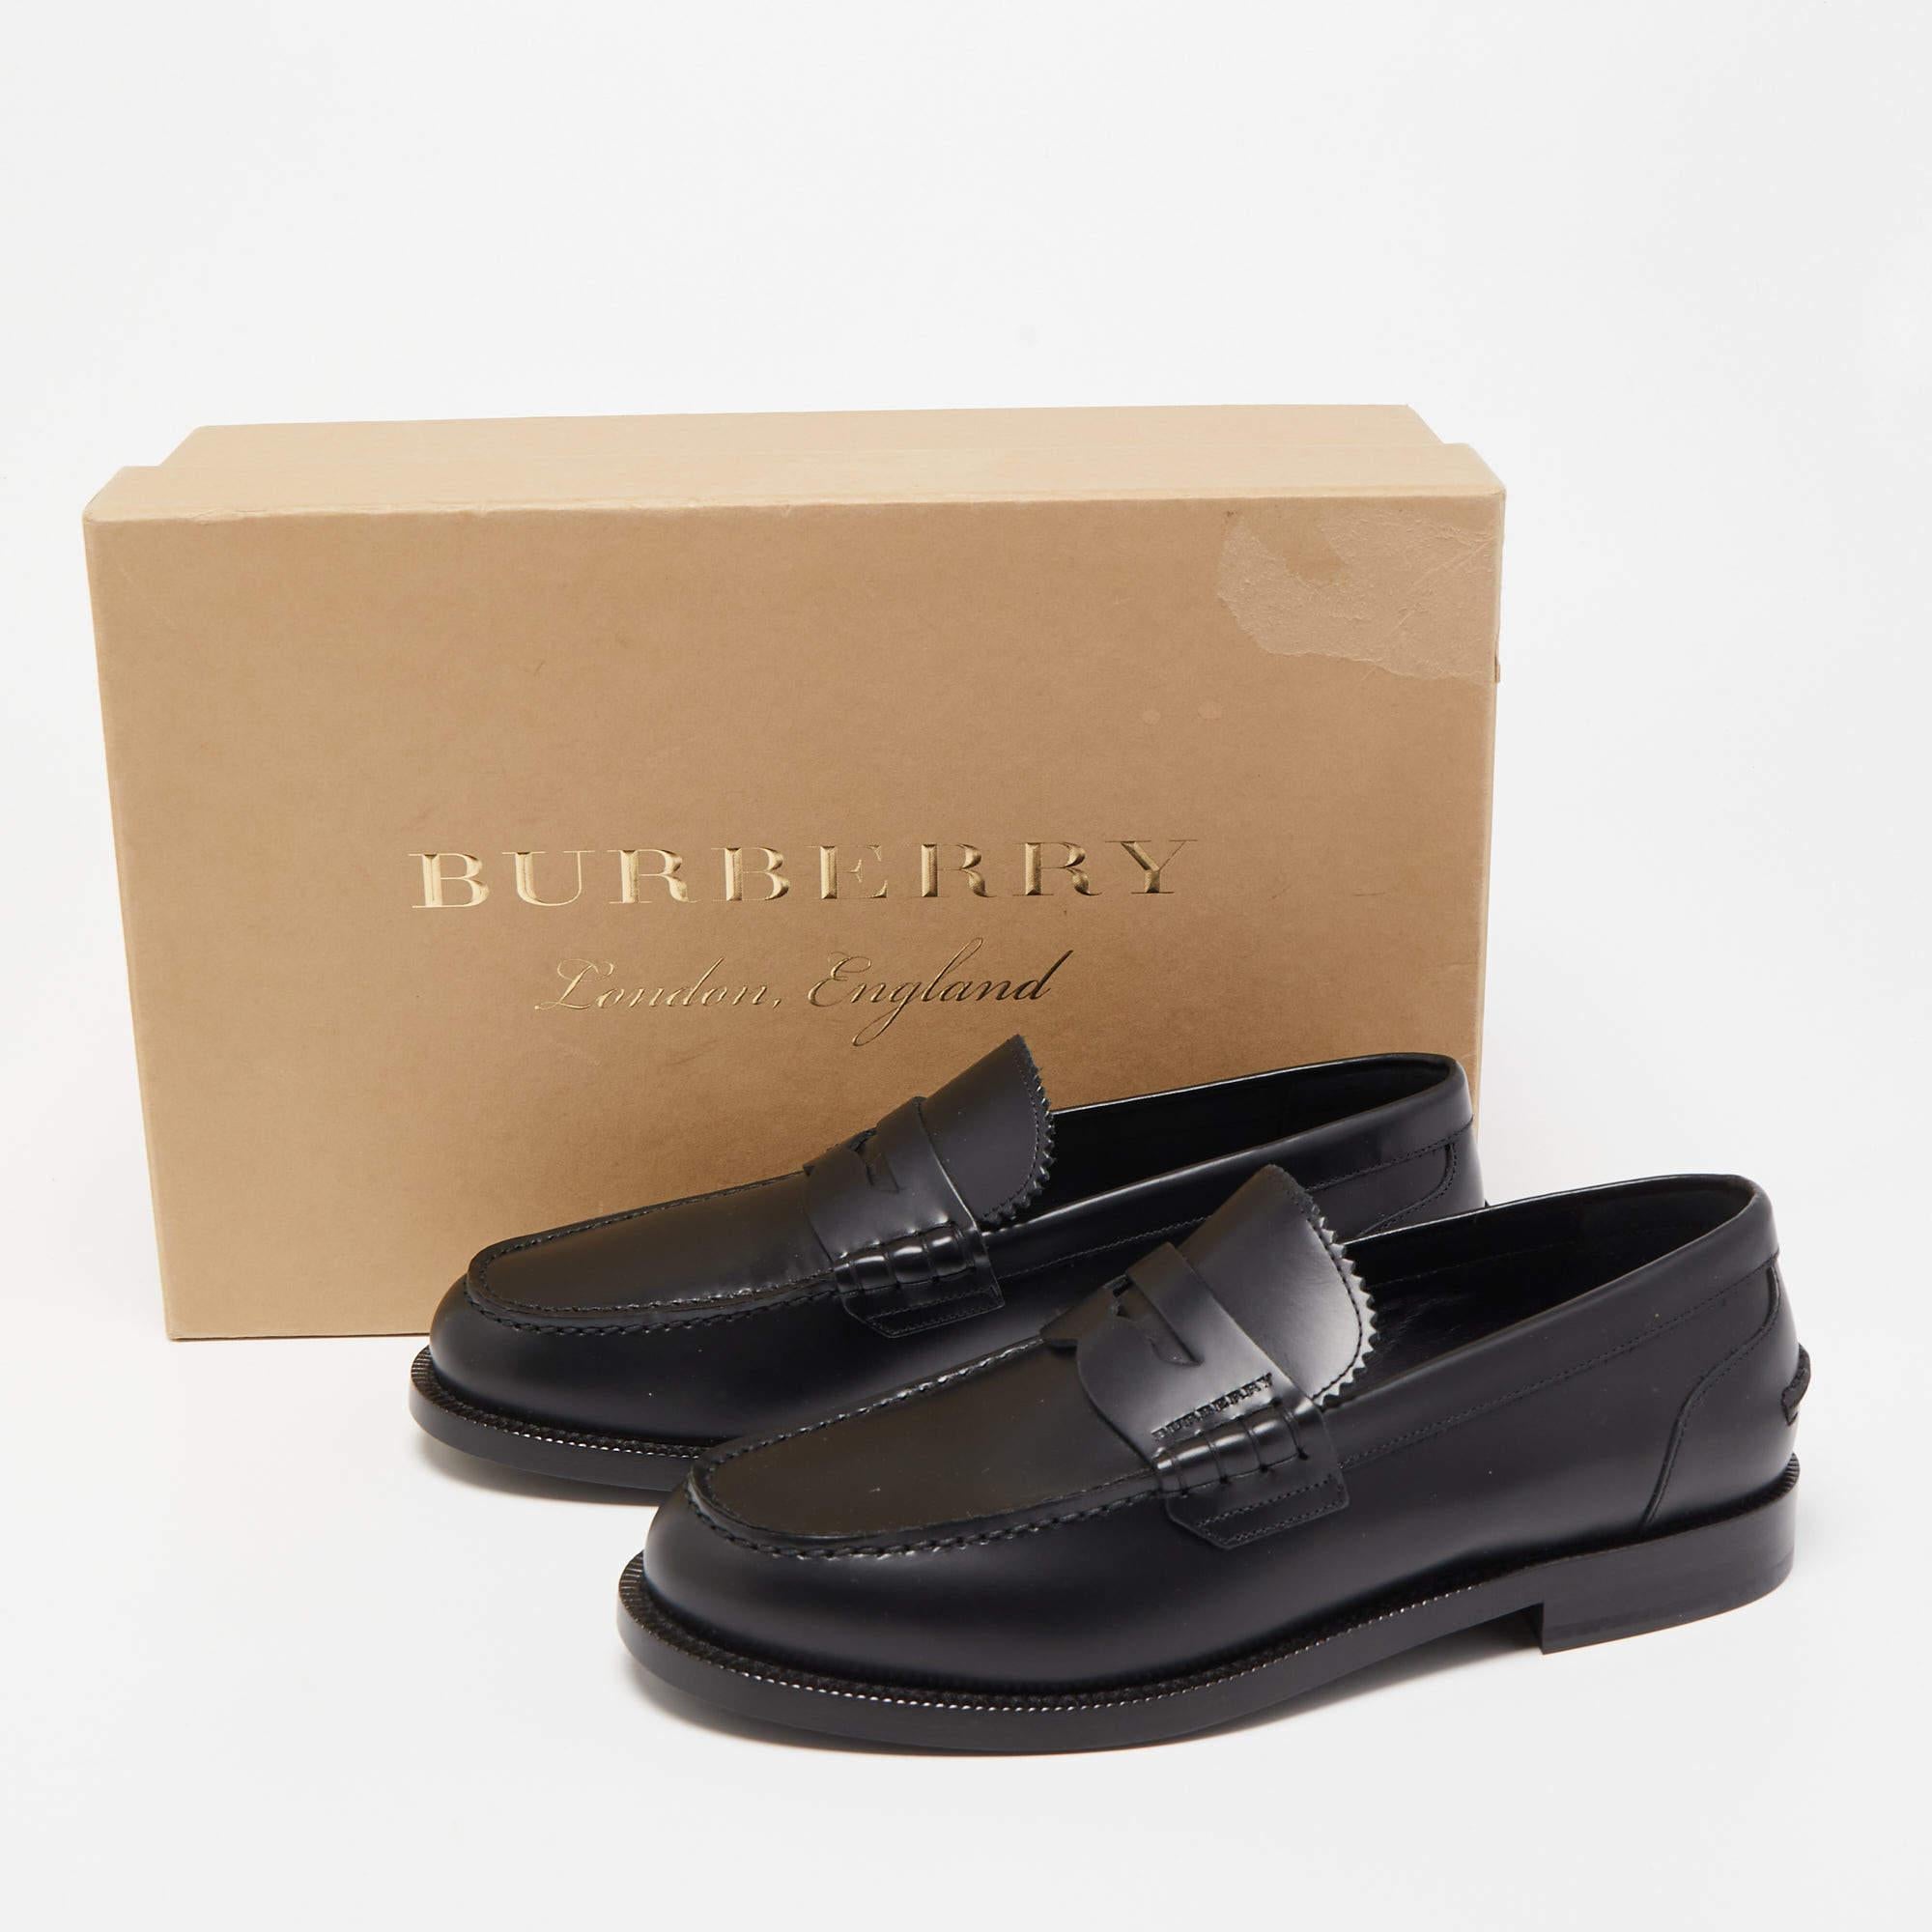 Burberry Black Leather Bedmont Penny Loafers Size 39.5 5